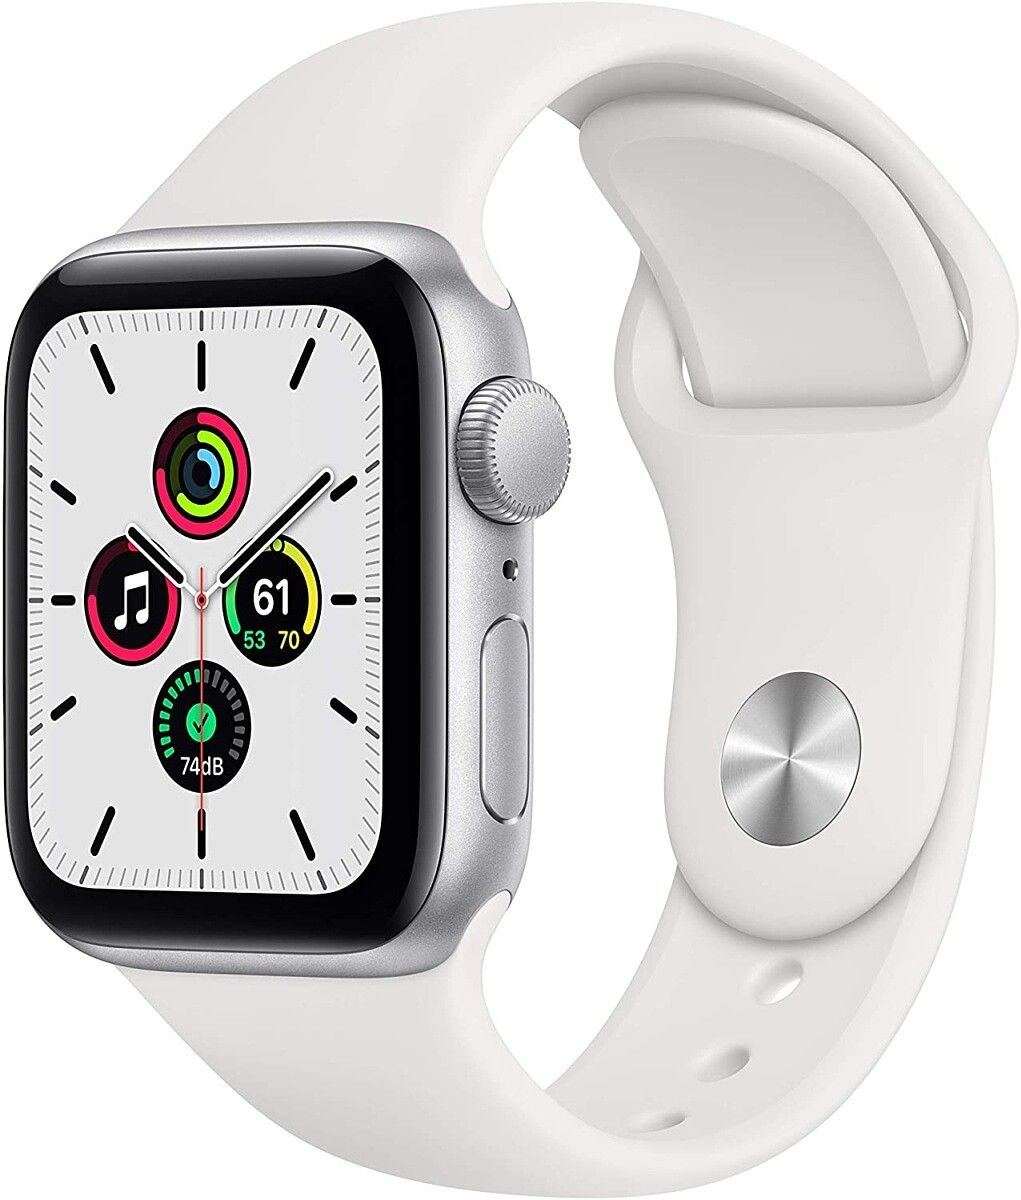 If you're looking to save some cash and don't need all the bells and whistles, the Apple Watch SE might be a much better bet for you at $249.99.